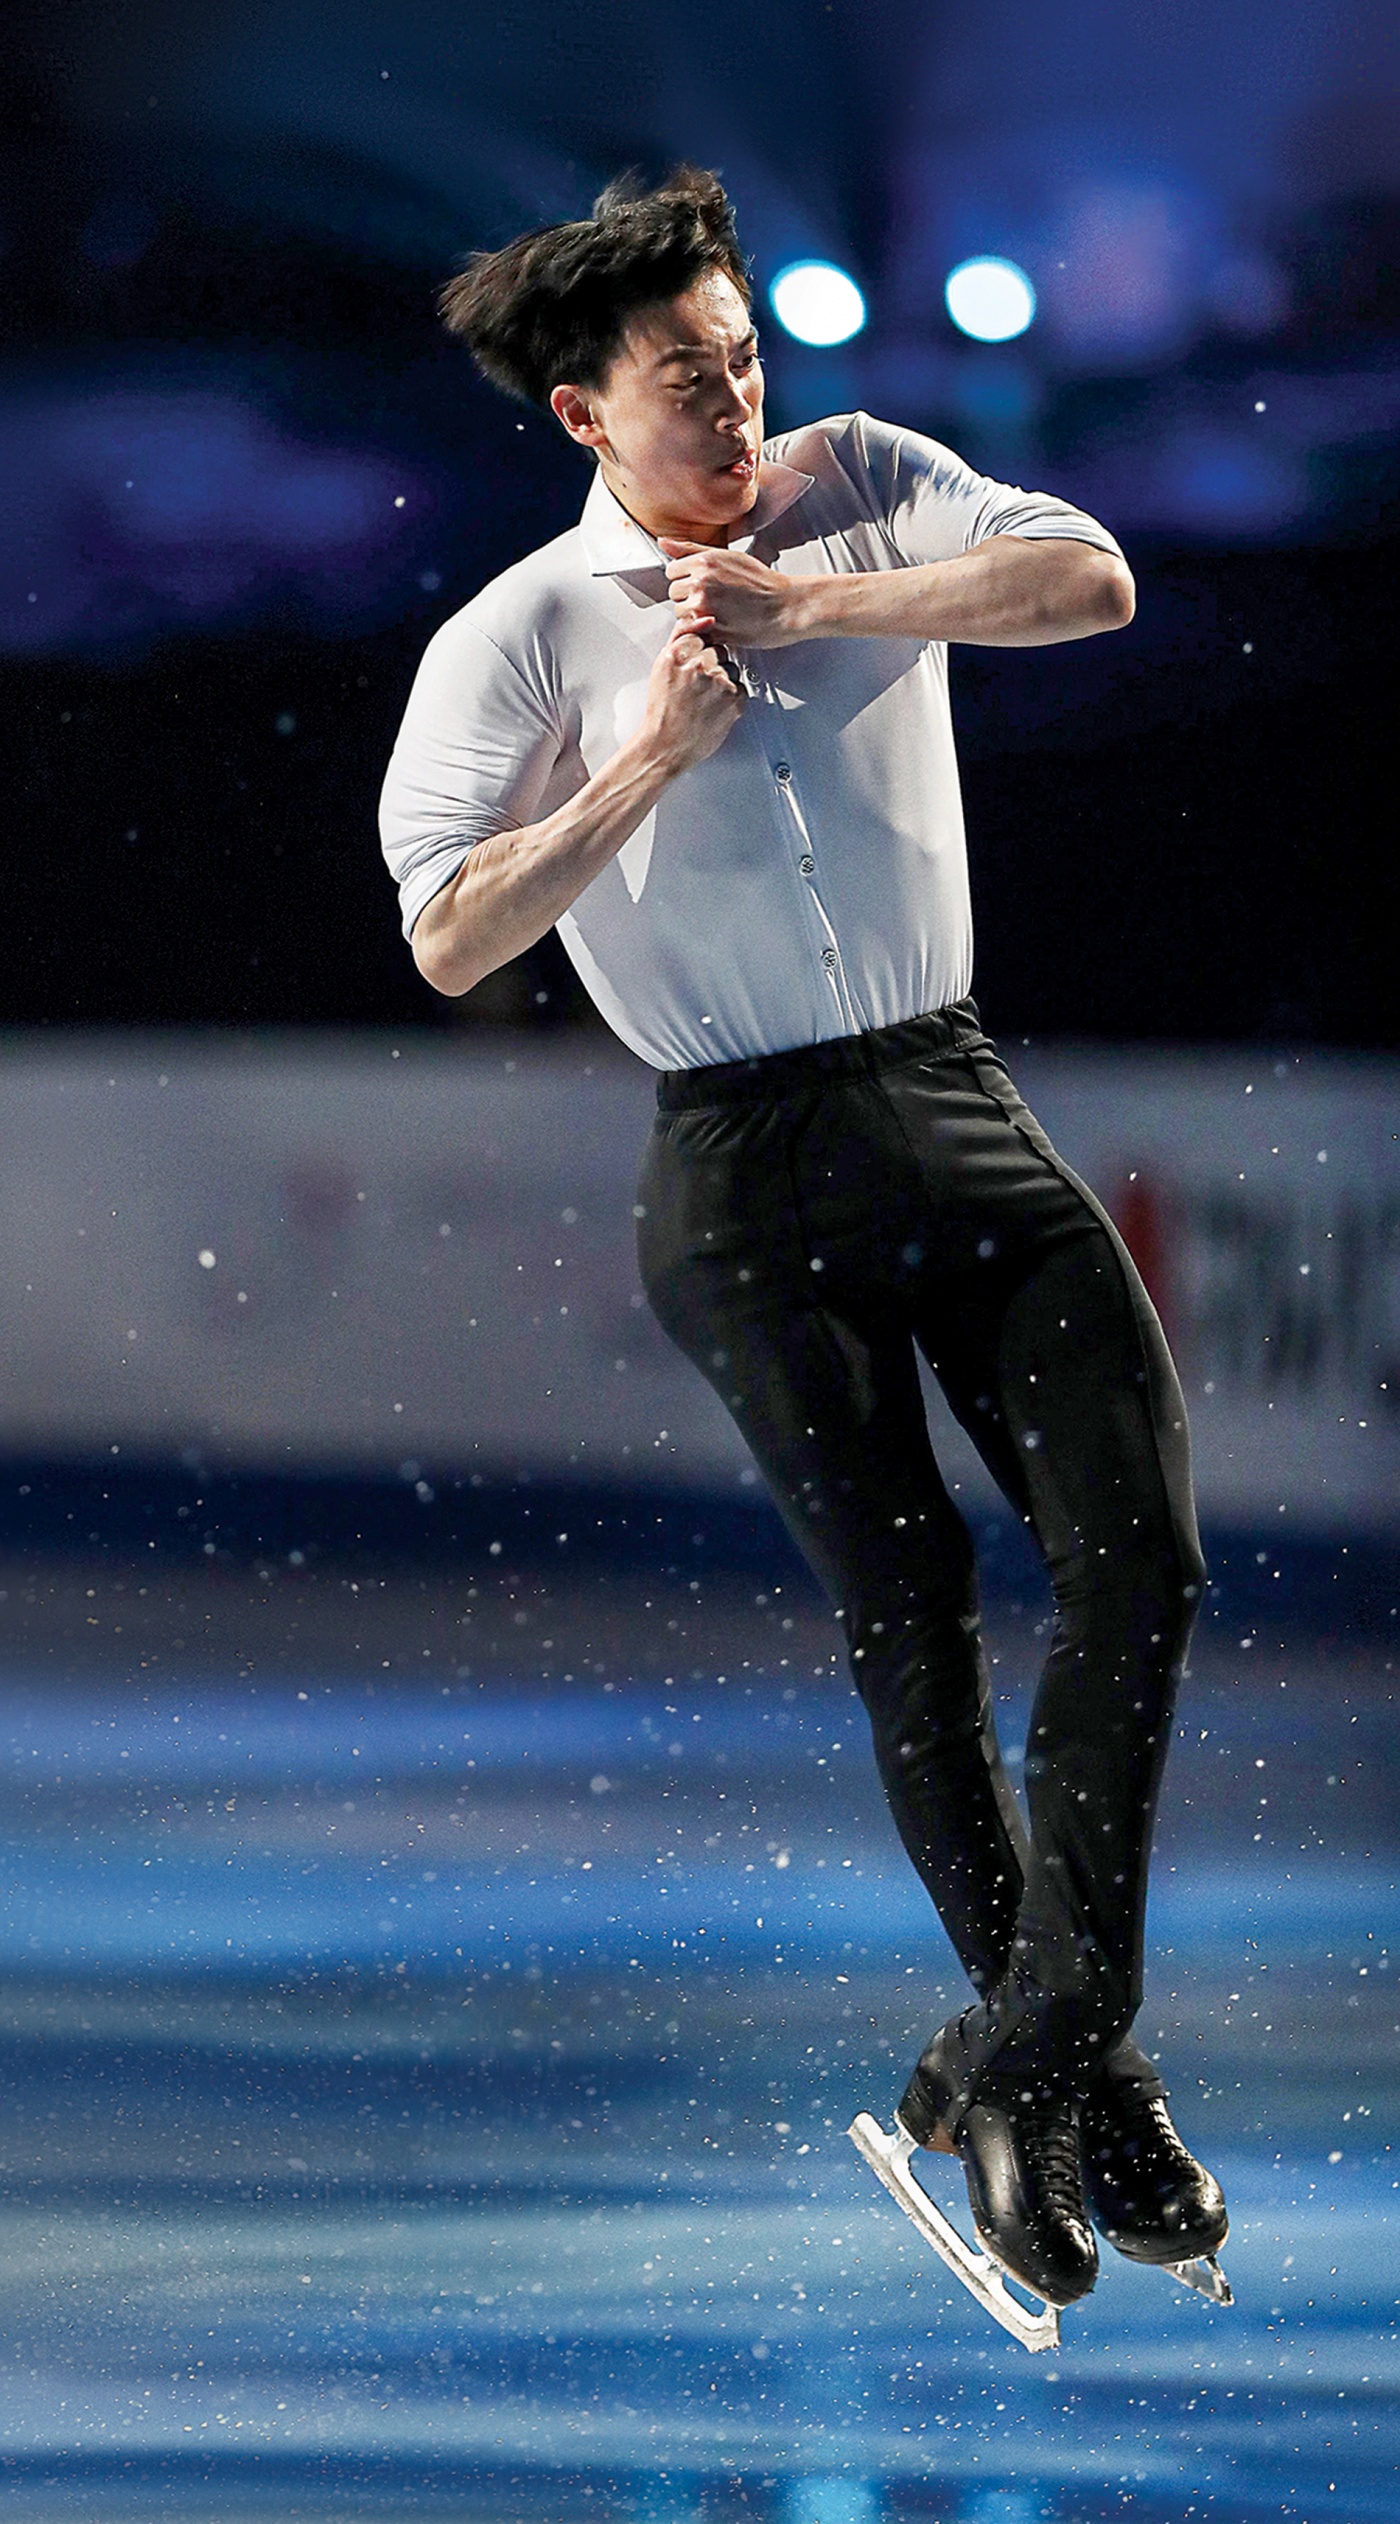 Zhou mid-rotation on the ice